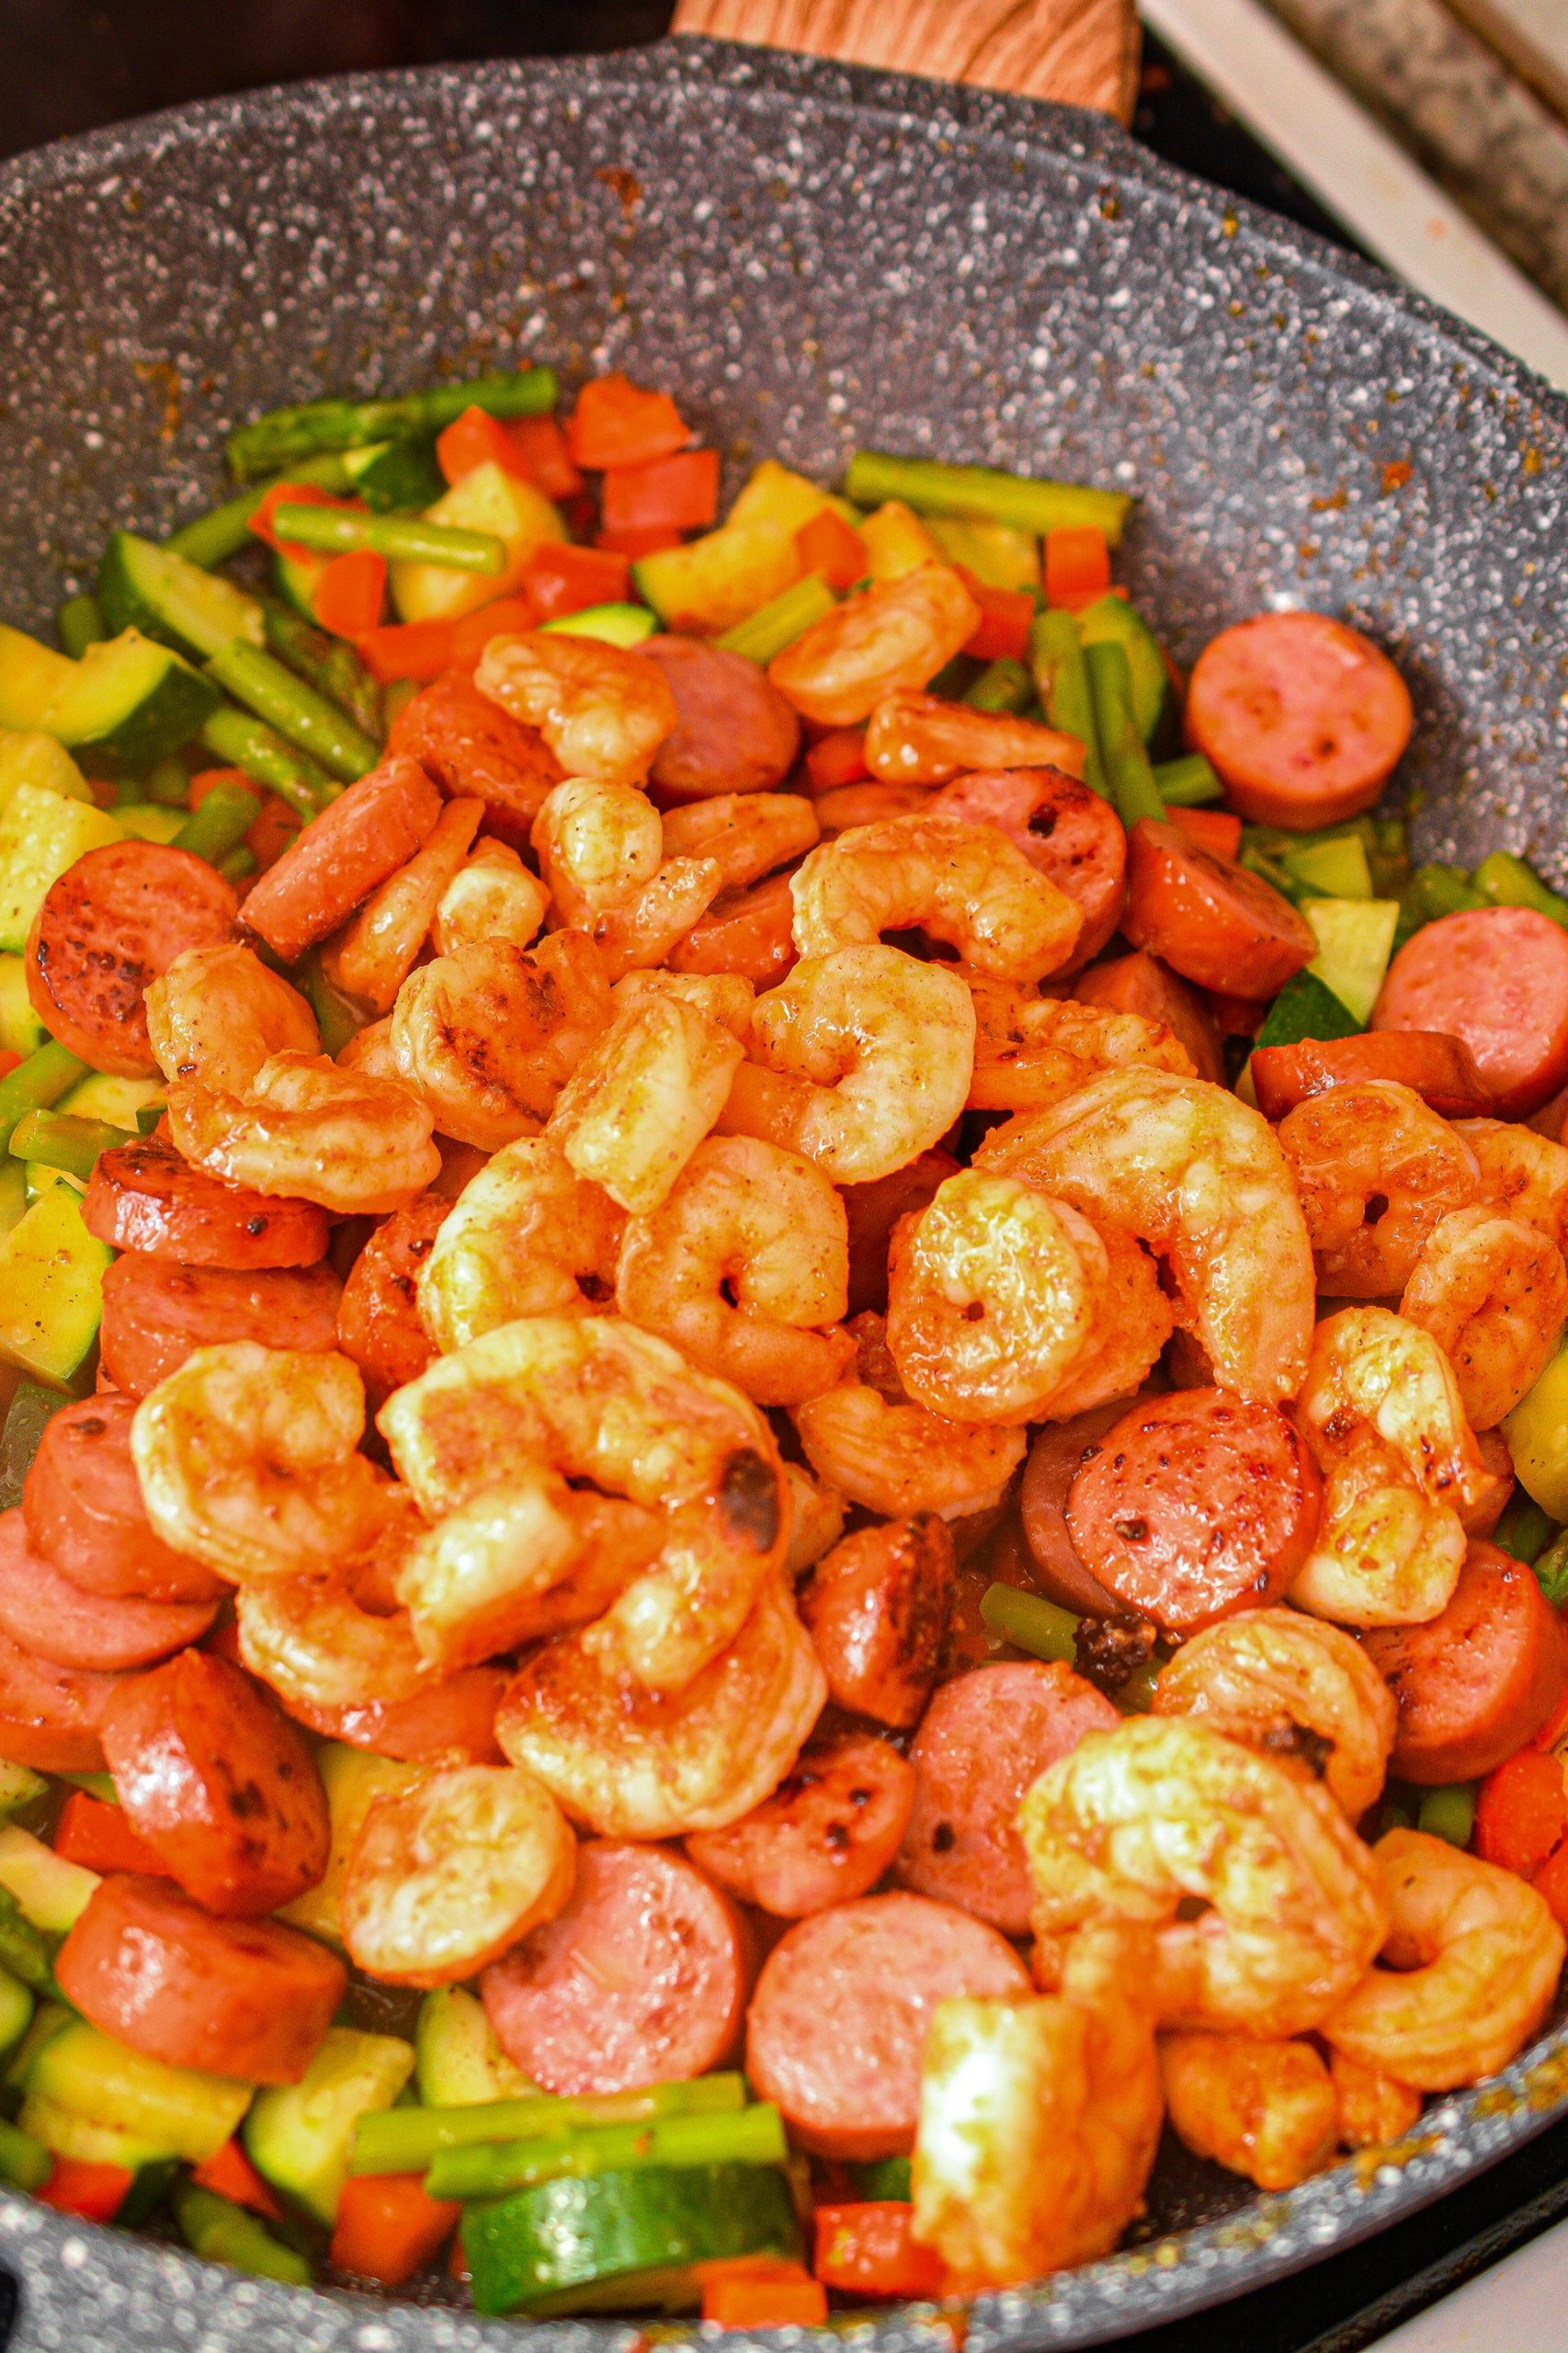 Stir the shrimp and sausage back in, and serve topped with parsley and red pepper flakes to taste.